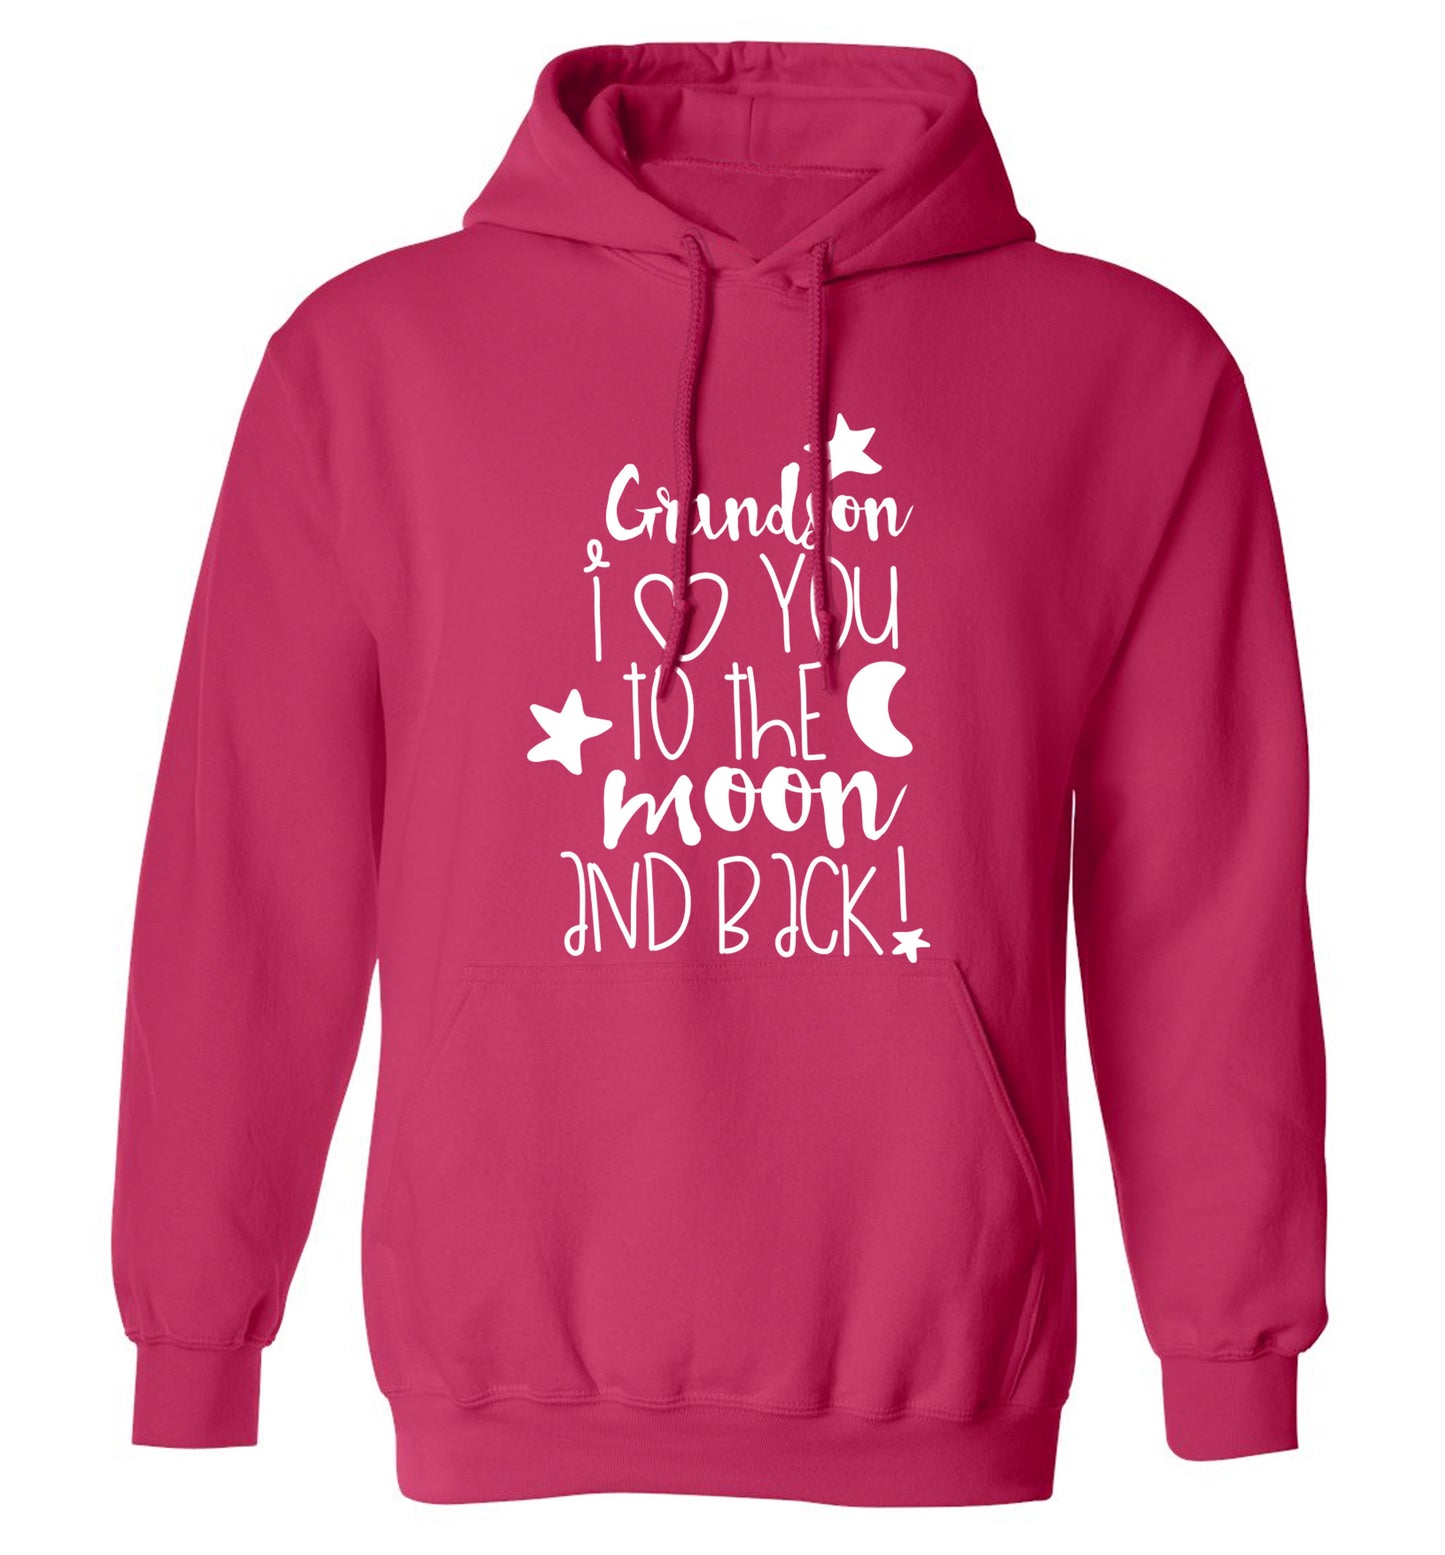 Grandson I love you to the moon and back adults unisex pink hoodie 2XL